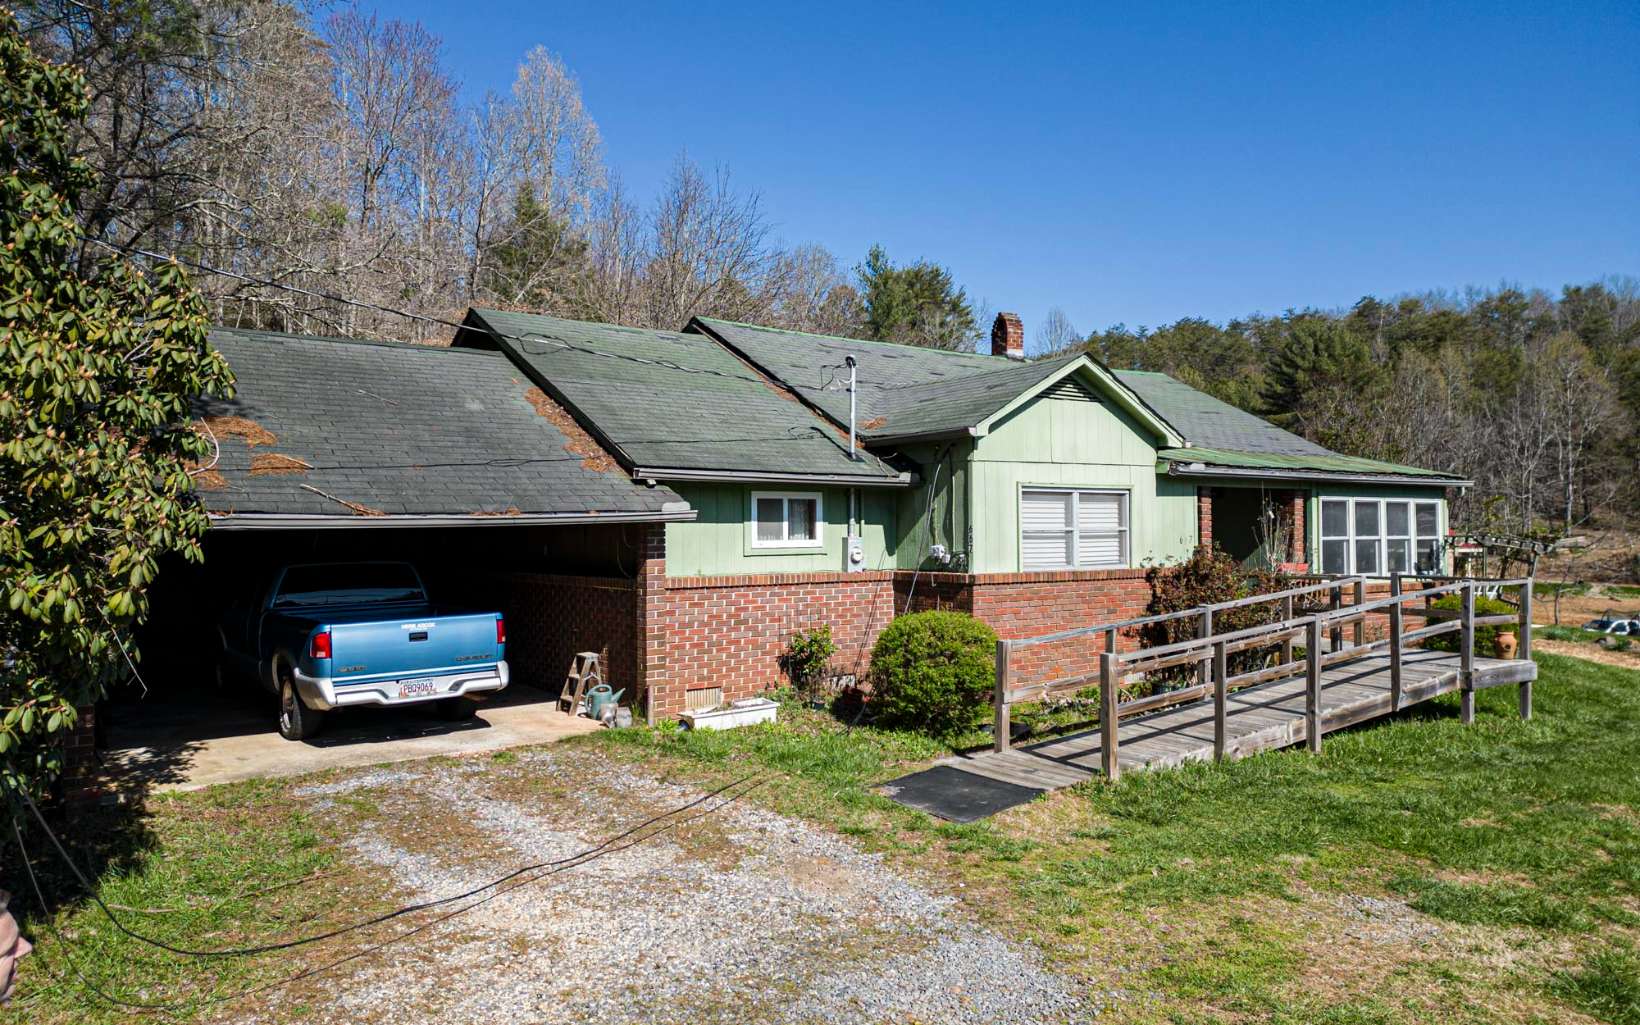 This home is located less than 1 mile from downtown Blue Ridge and just beyond the city limits of Blue Ridge. Fantastic opportunity to get your hands on a great fixer-upper. This home offers three bedrooms and one full bath, plus a bath and an attached carport.